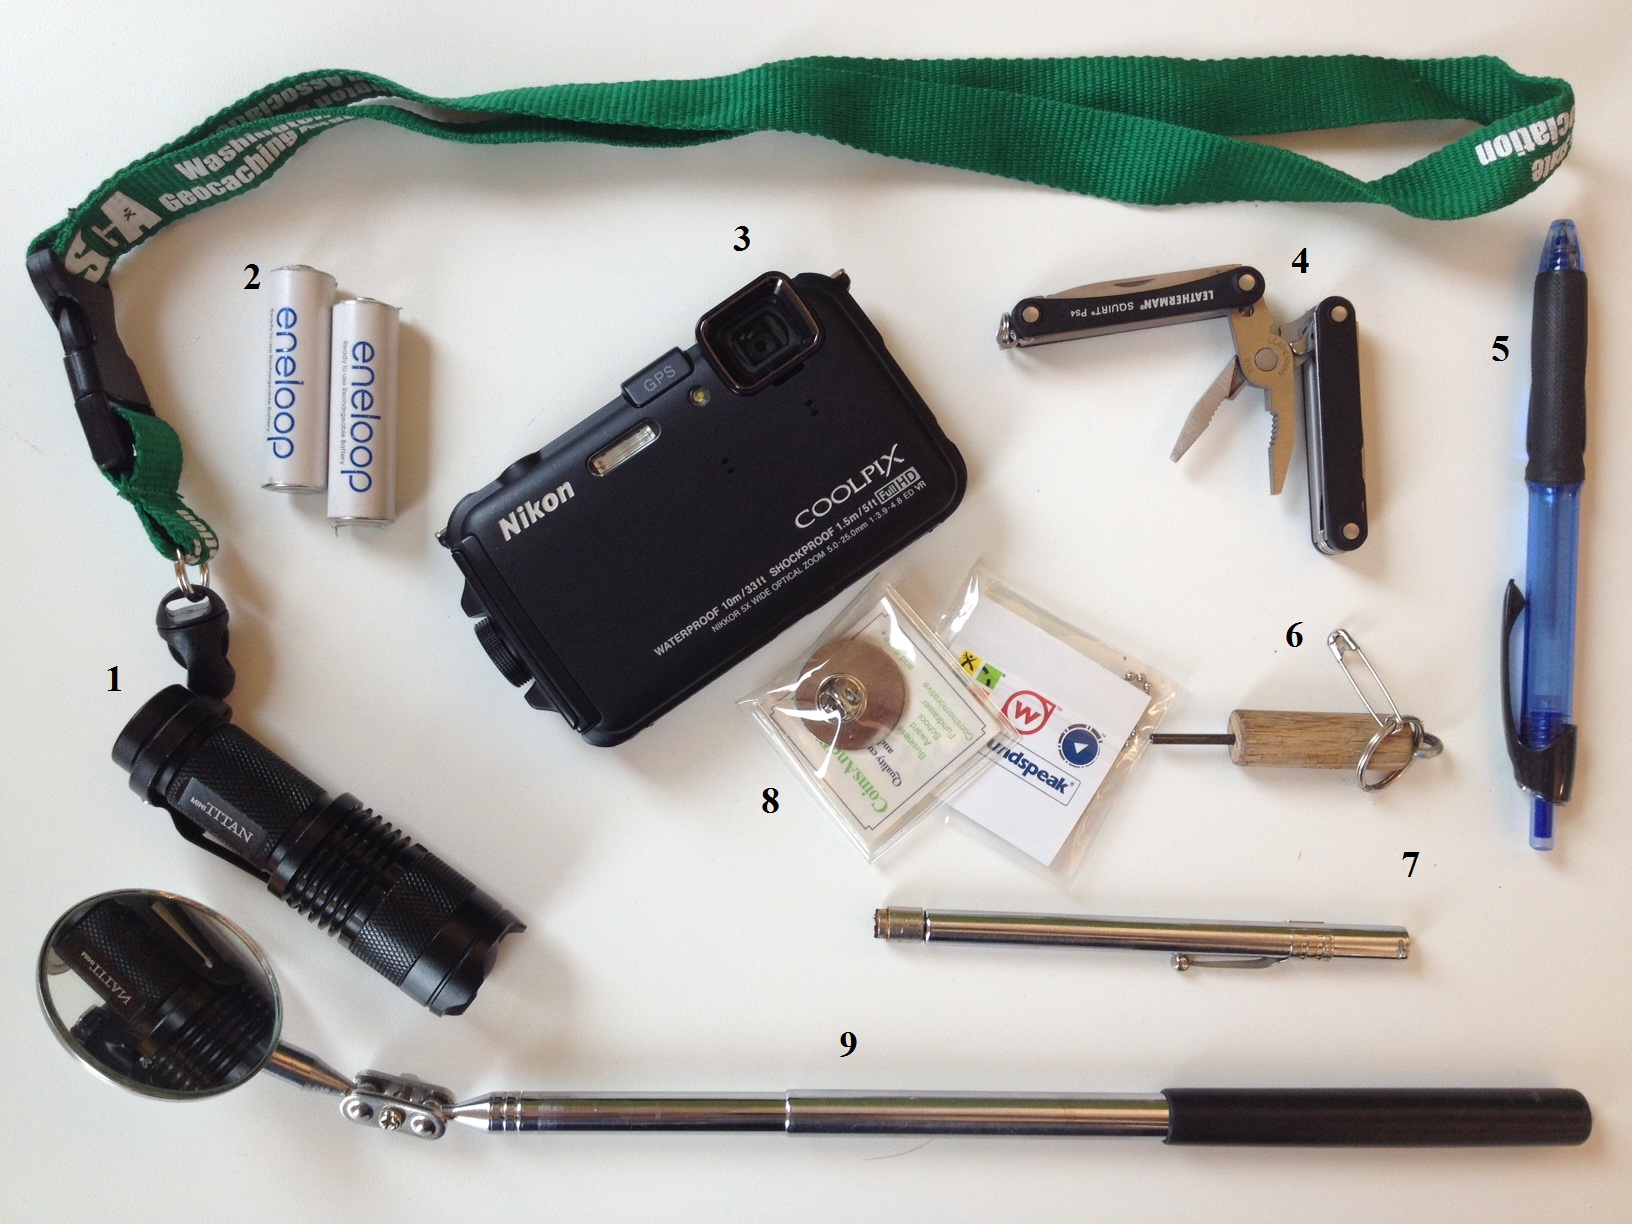 Here are 9 Geocaching Tools – What Else Should You Pack